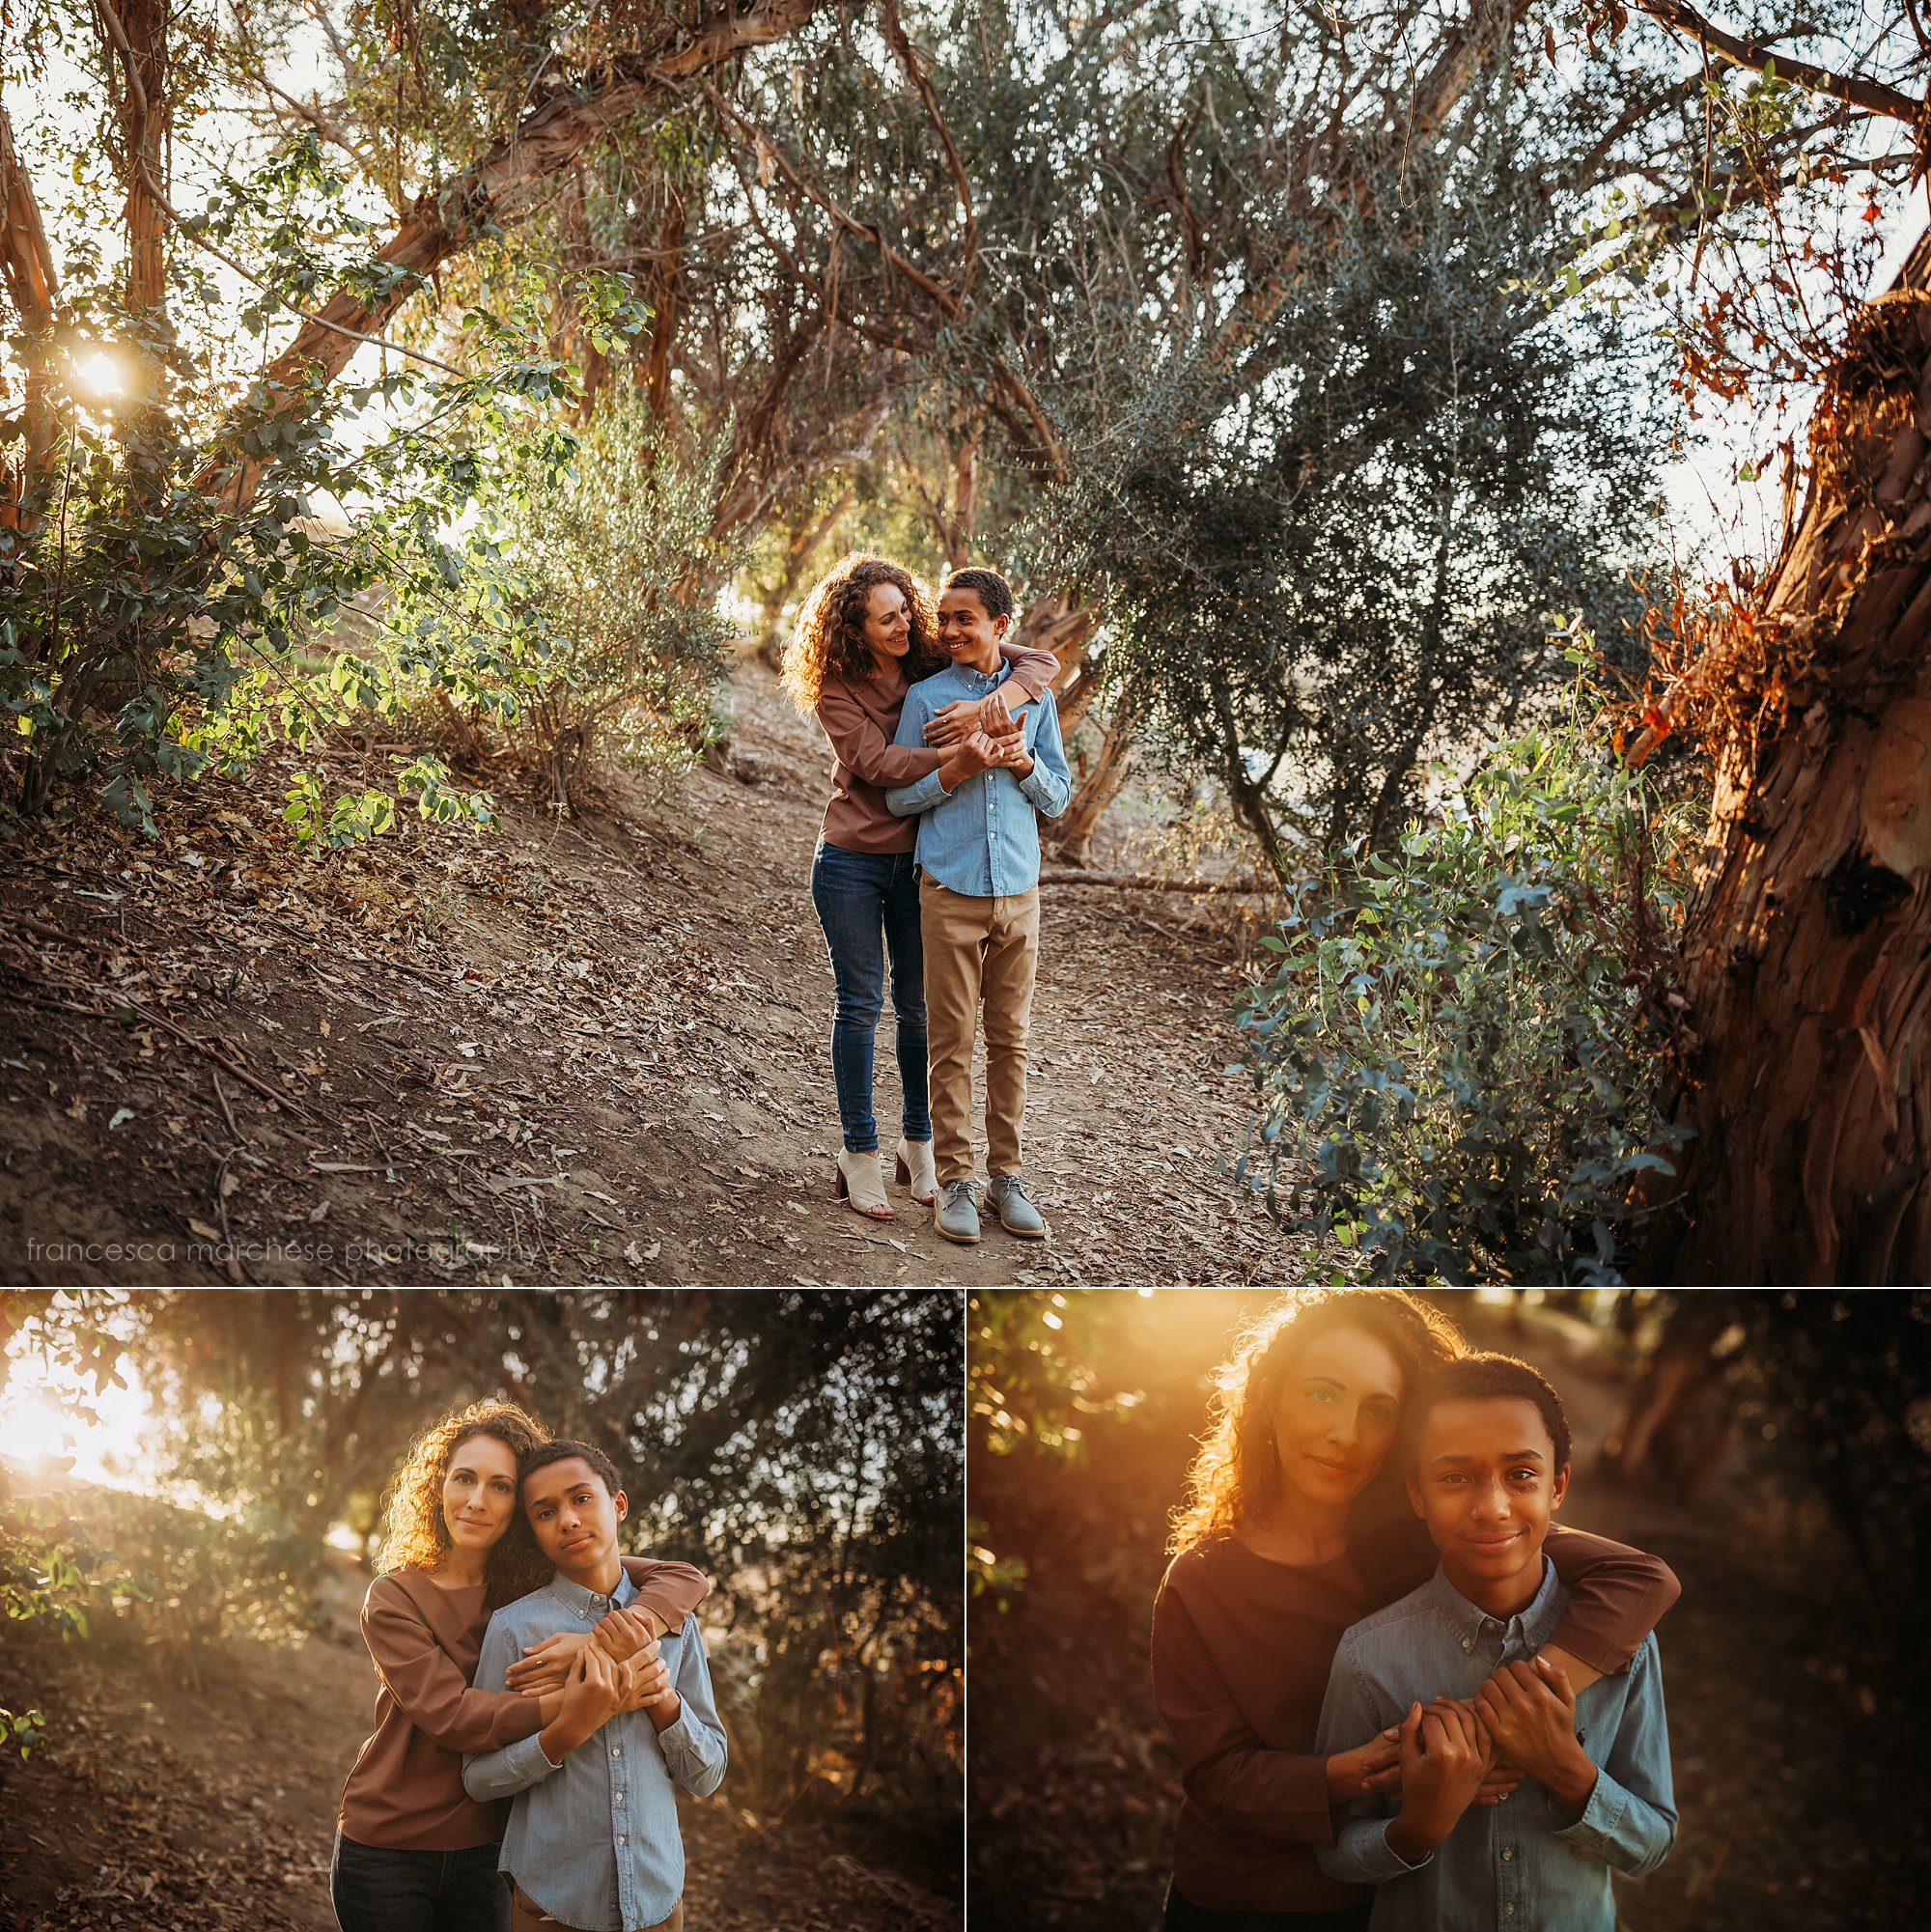 Francesca Marchese Photography motherhood photography session mother and son golden hour